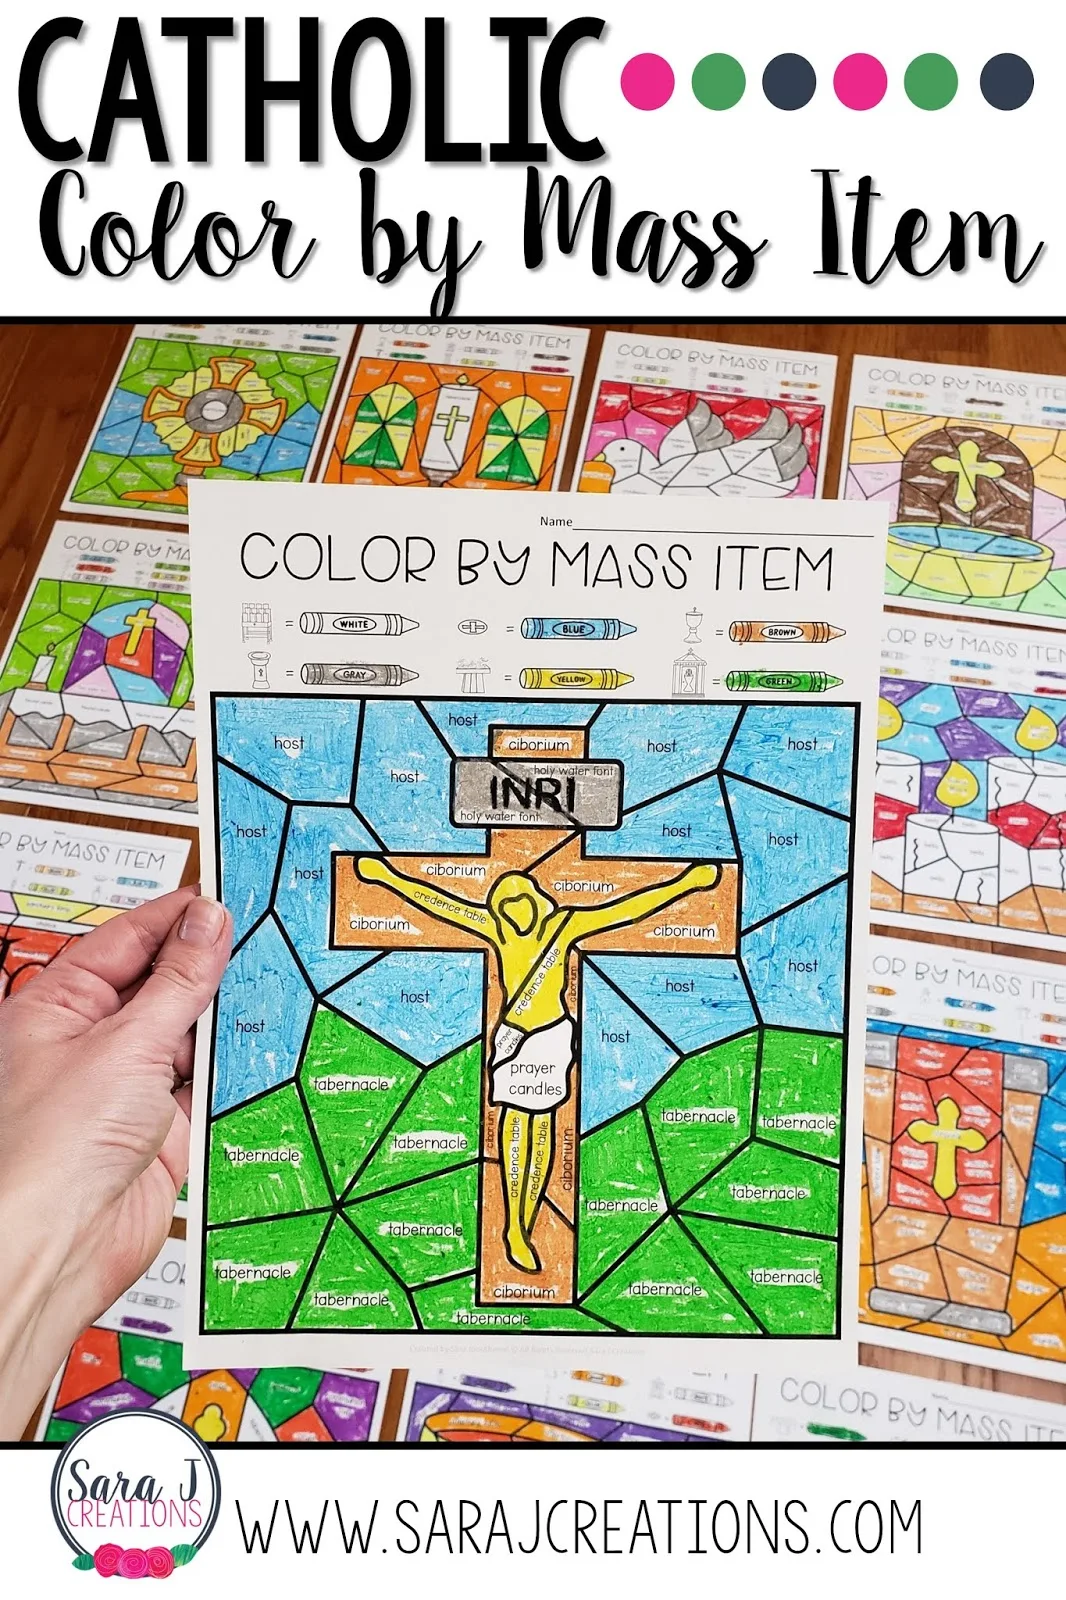 Make teaching the Catholic faith fun and engaging for kids with these Catholic Color by Mass Item Coloring Pages! Learn the different items we use during Mass with these five different versions of coloring pages. Easy to differentiate to meet your students needs.